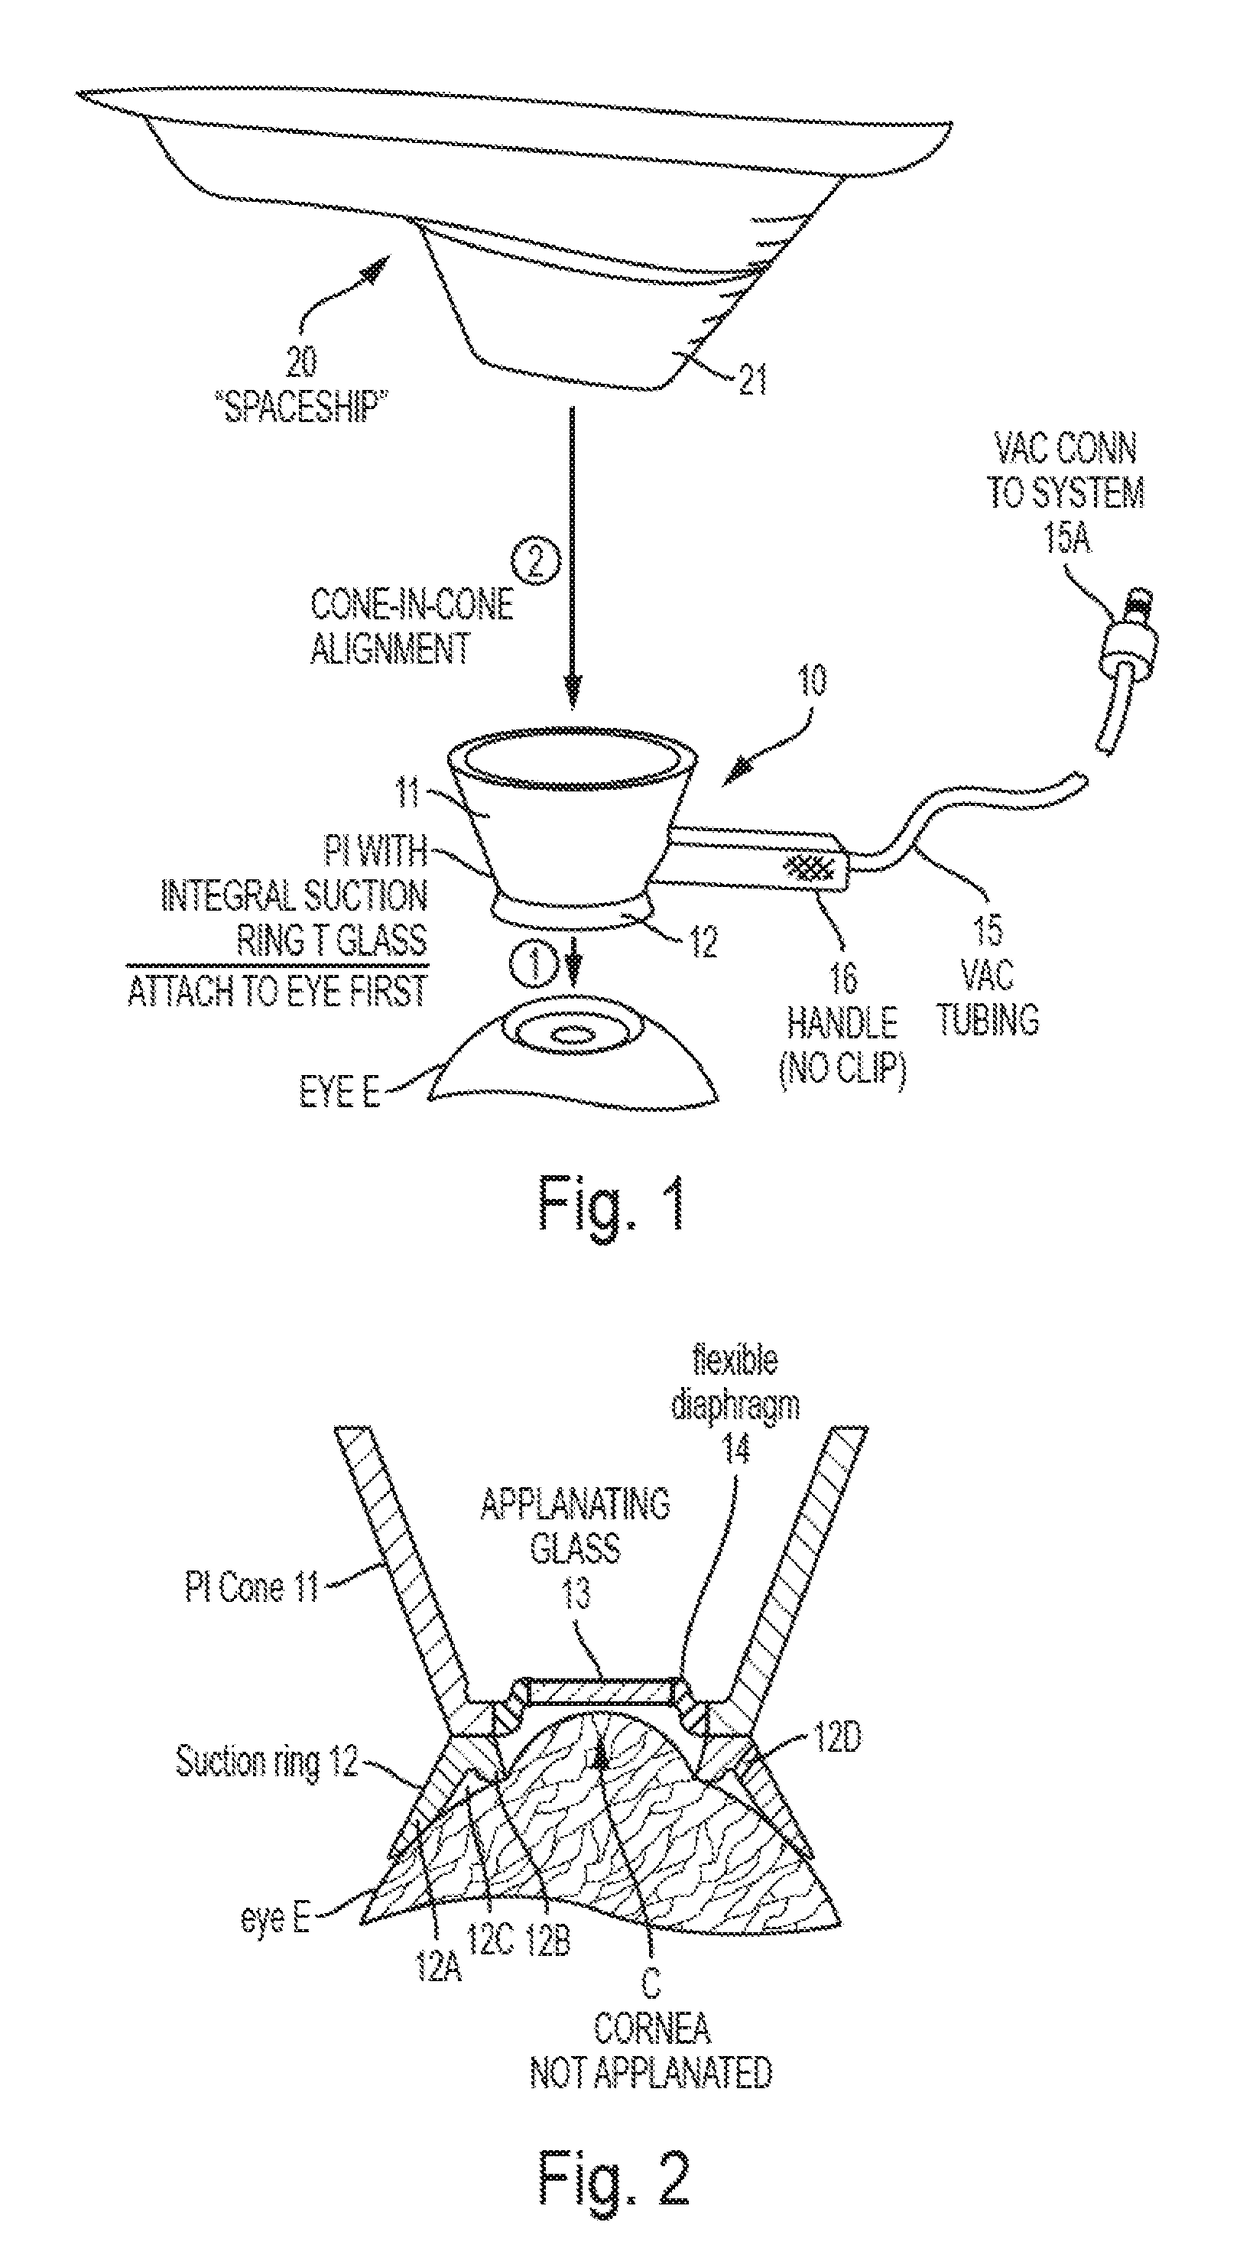 Patient interface device for ophthalmic surgical laser system